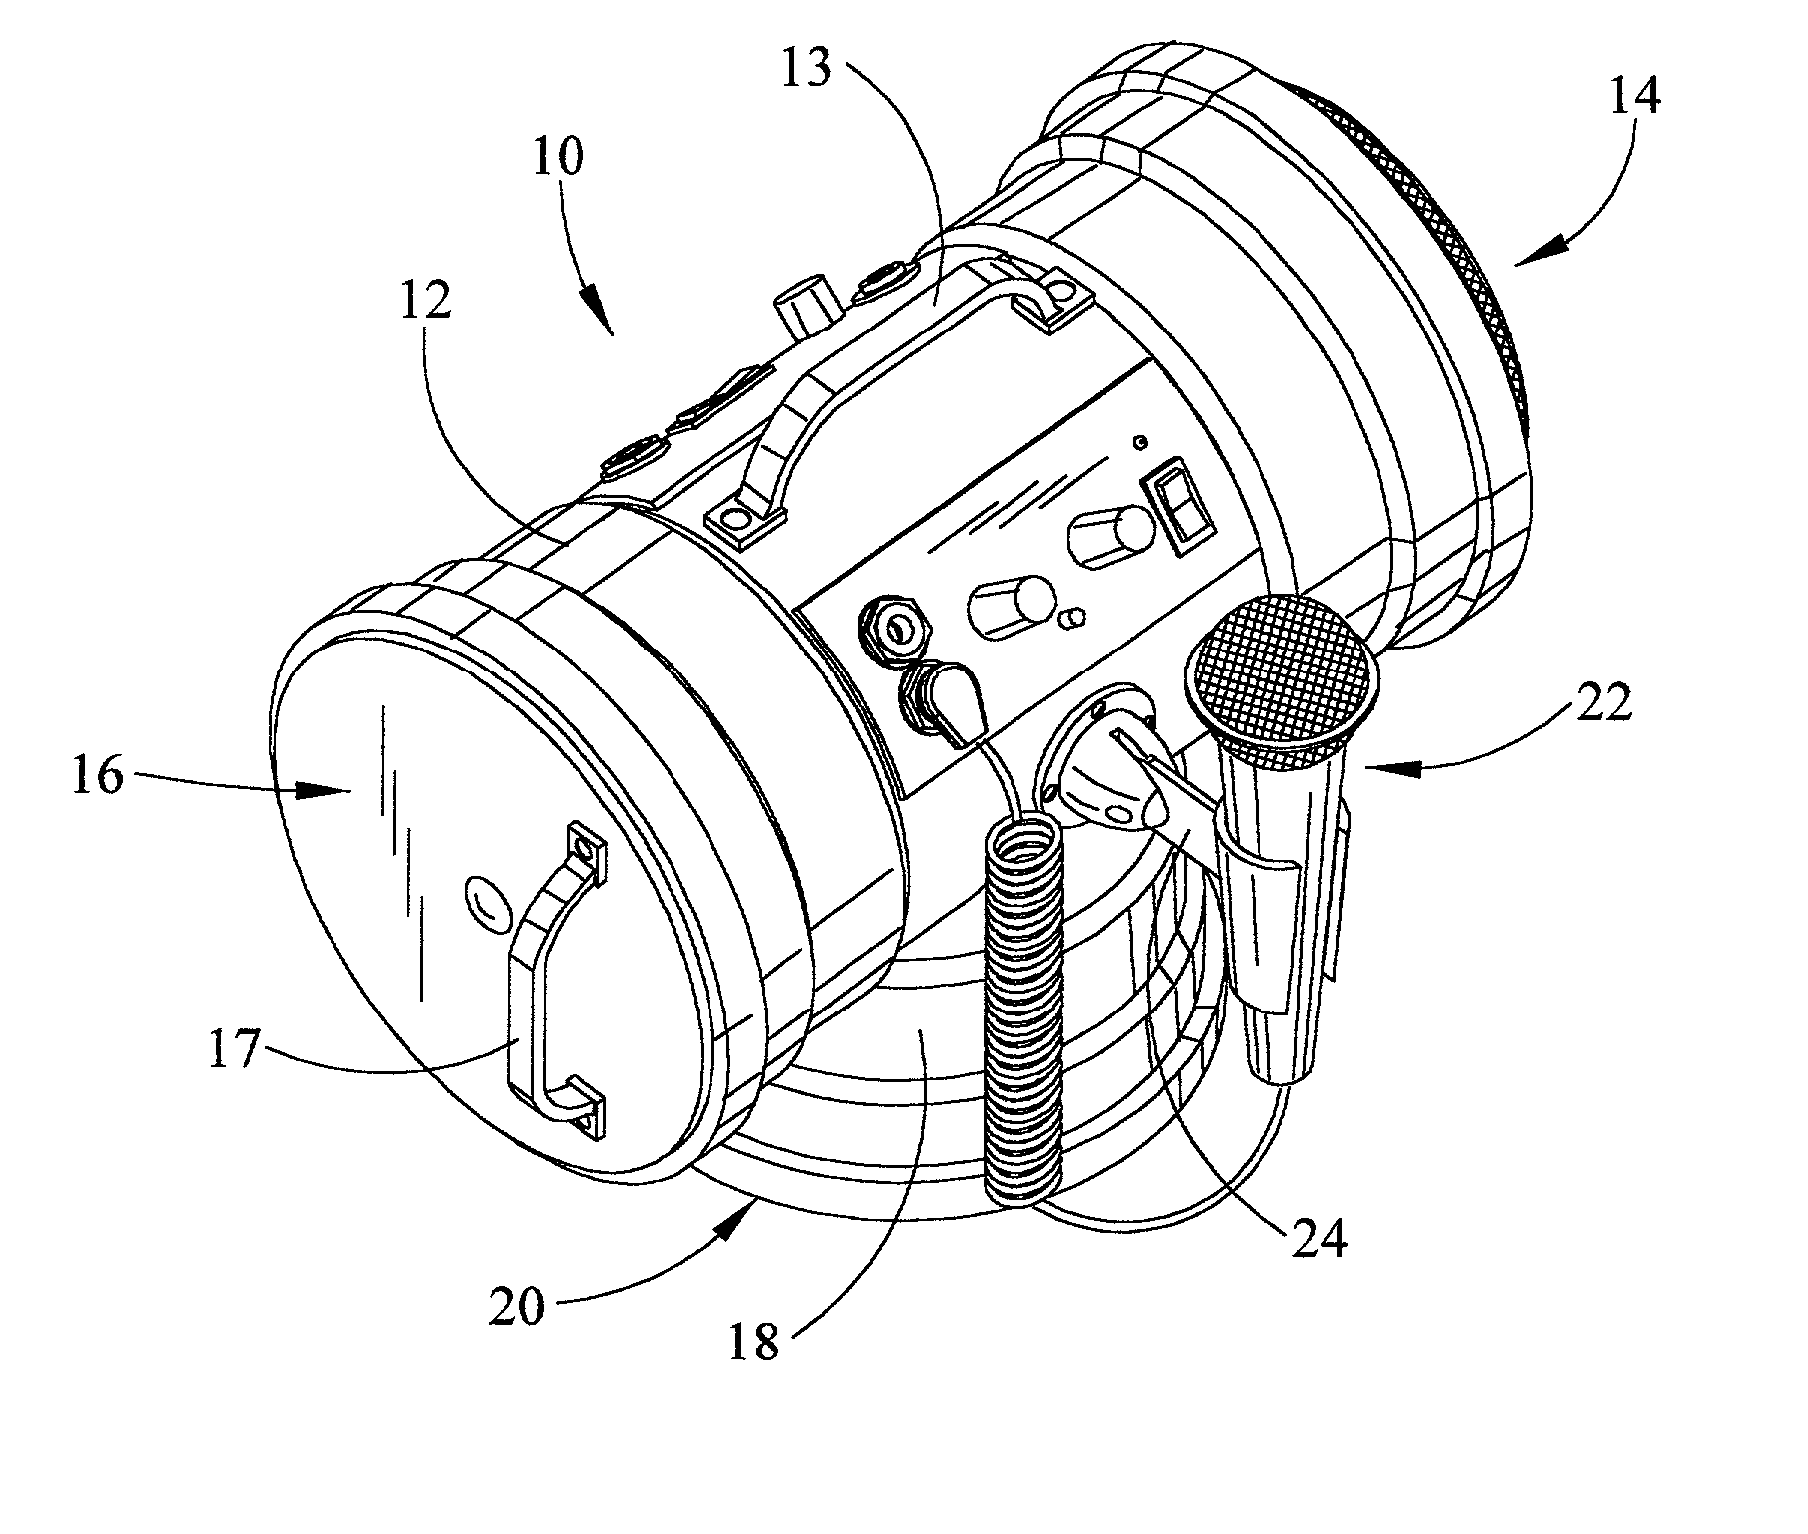 Method and apparatus for a portable public address system